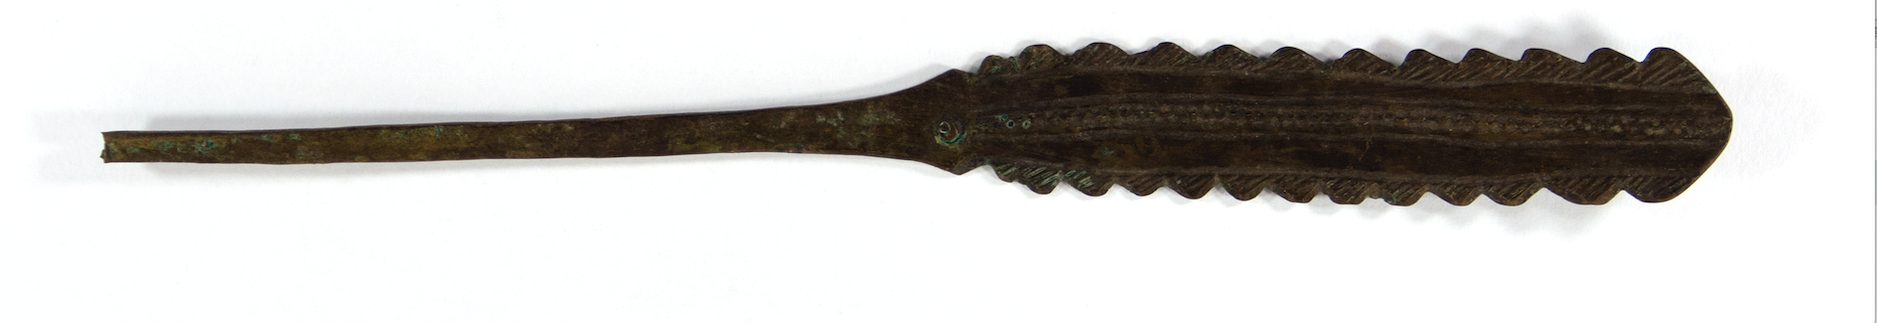  A brass hairpin. The handle is long and flat with serrated edges. It is decorated with patterns formed form lines, circles and dots. 